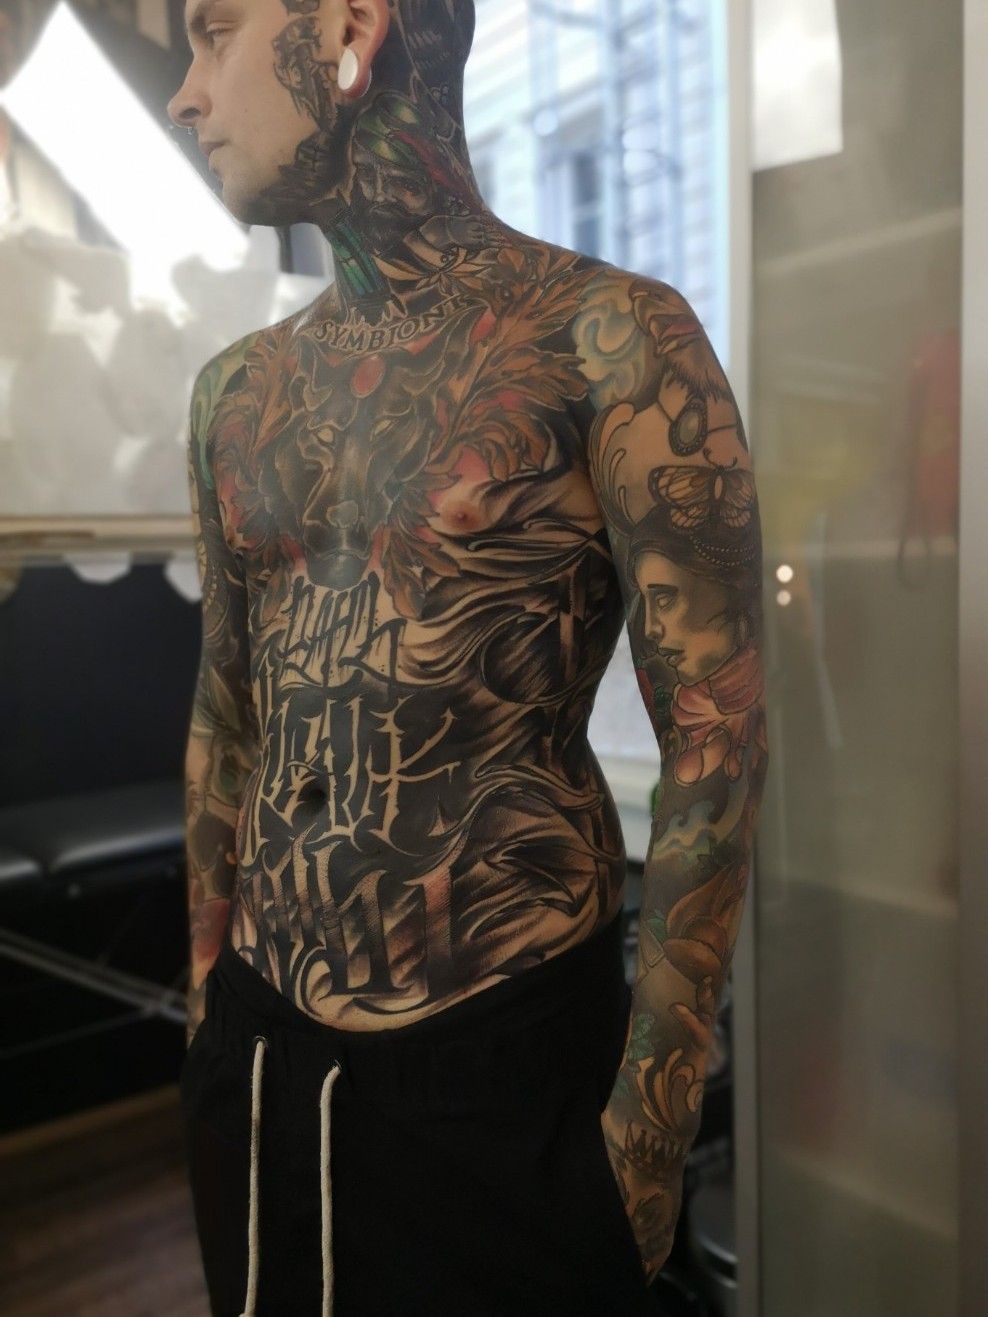 What Rocks Best tattoo parlors in the Rockford area as voted on by readers